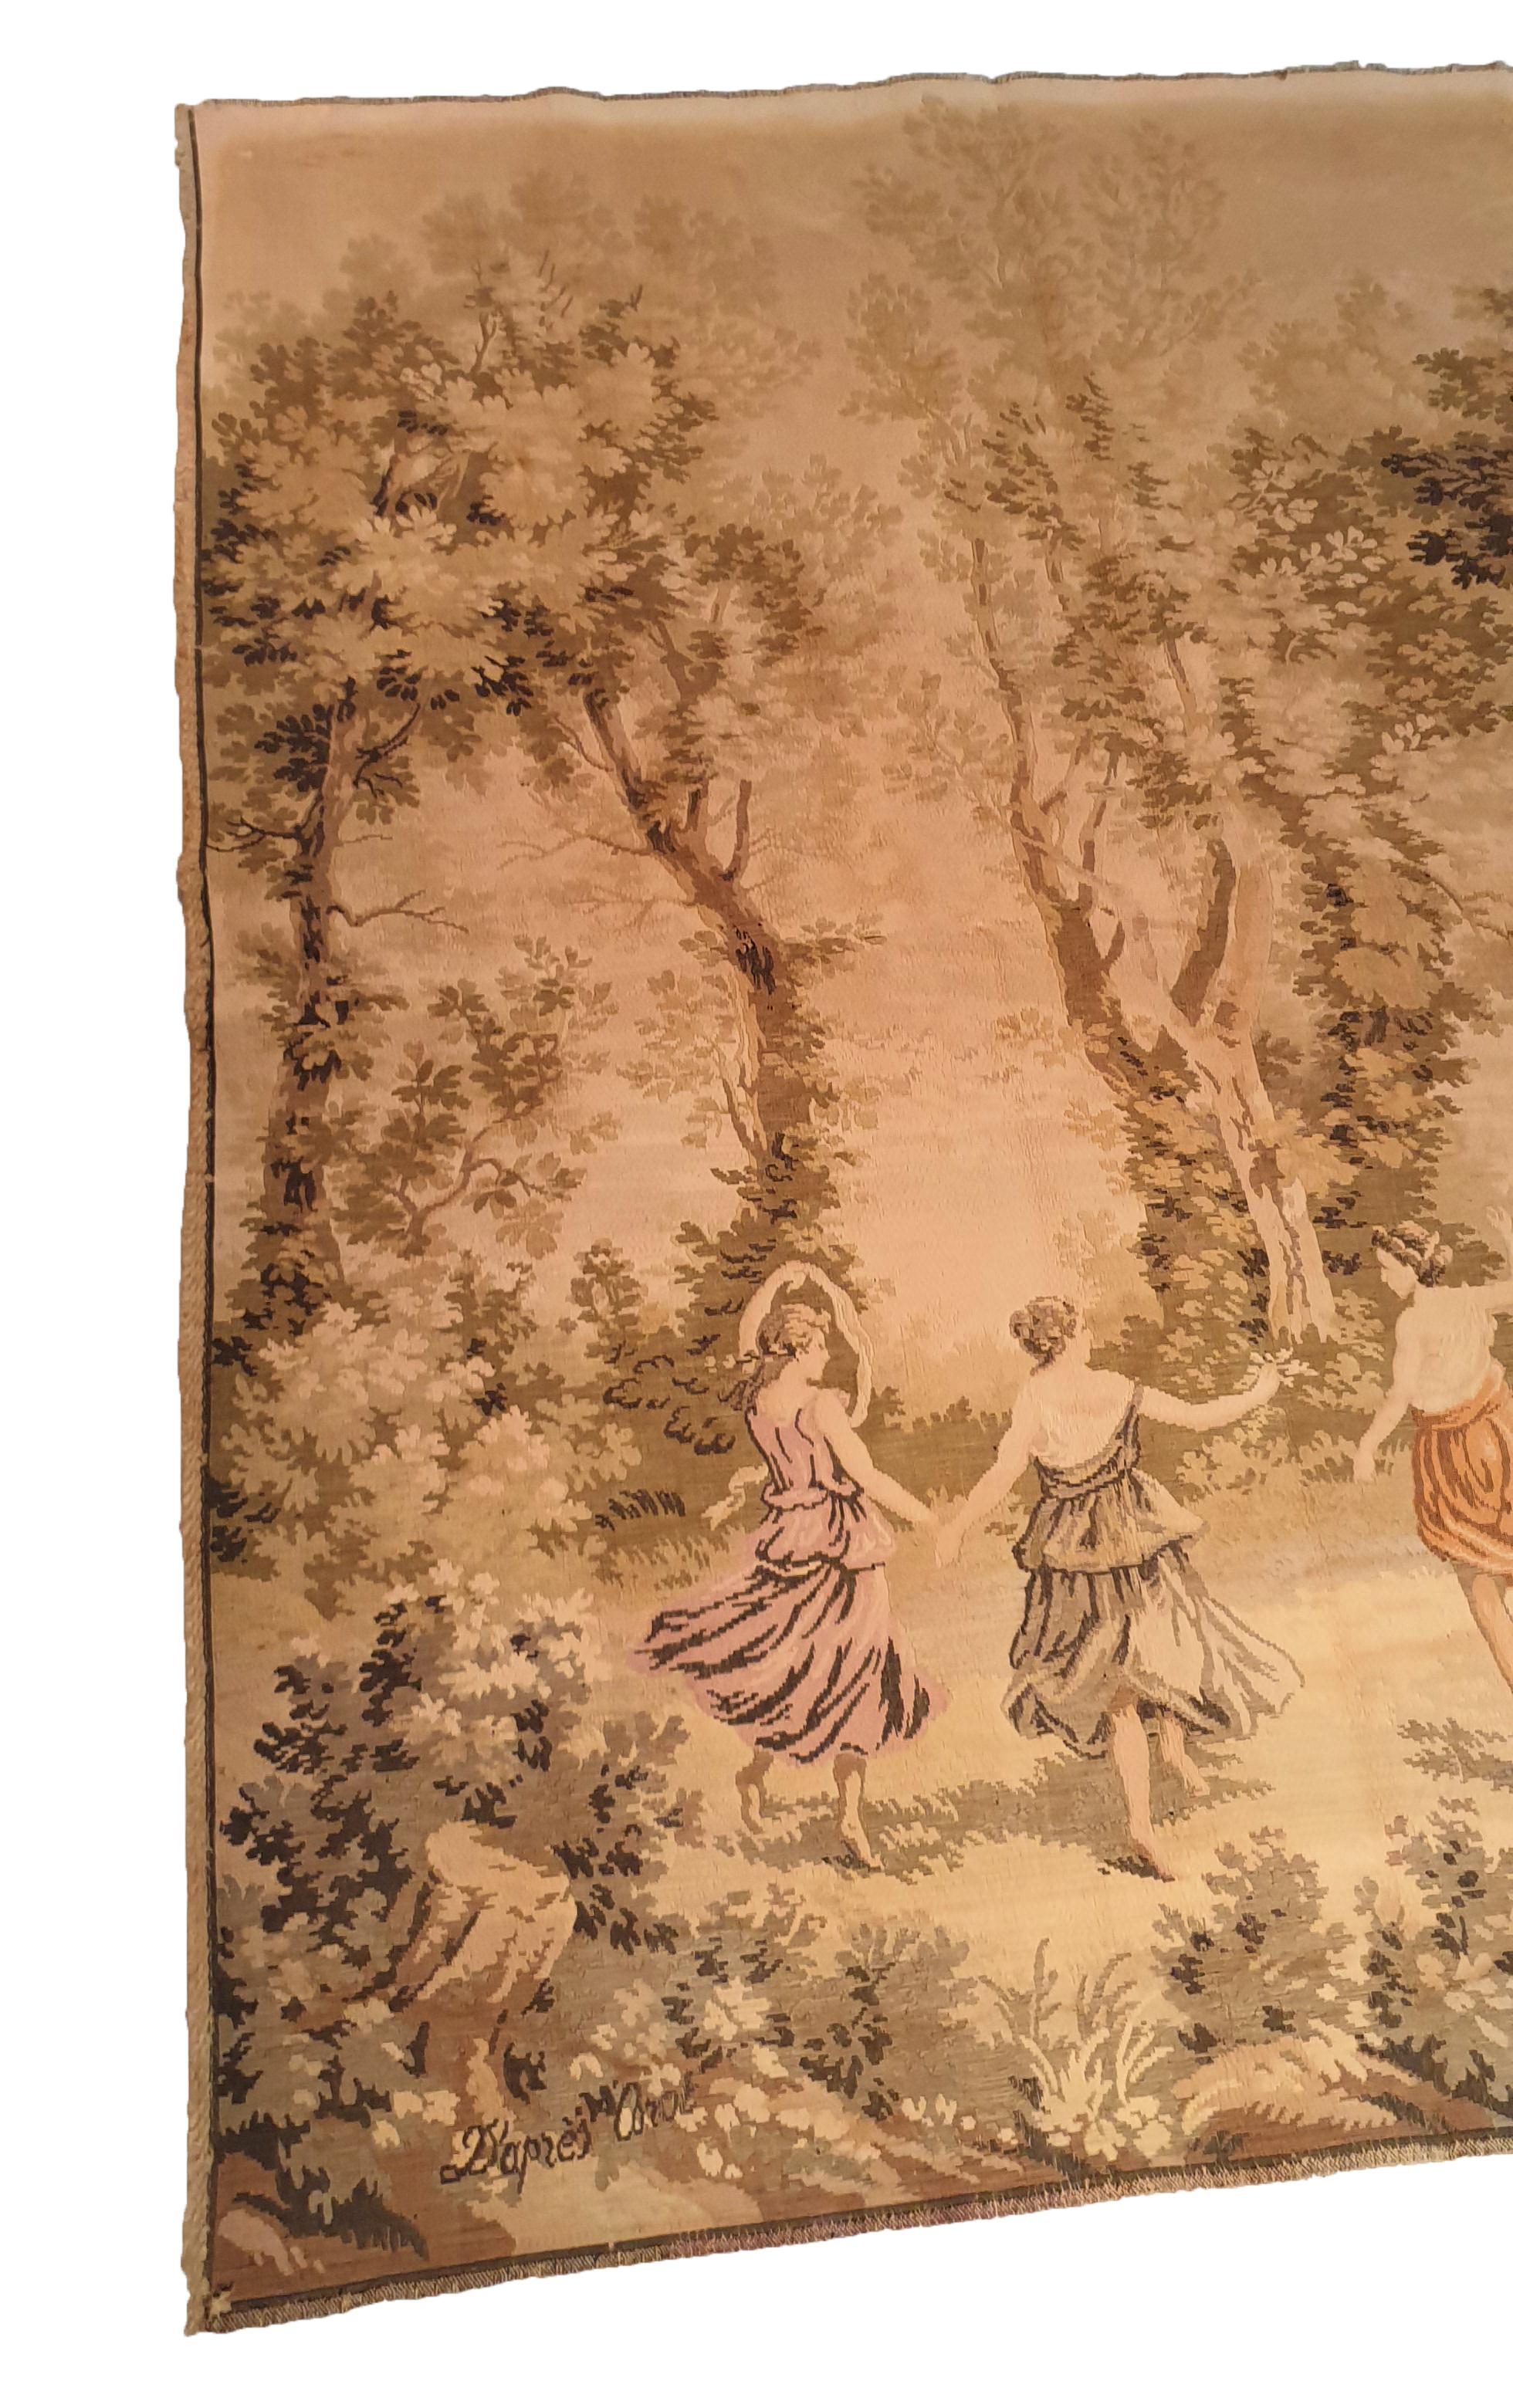 Tapestry of the 20th century in perfect condition of conservation.

Negotiable price and free delivery.

Dimension: 195 x 135 cm